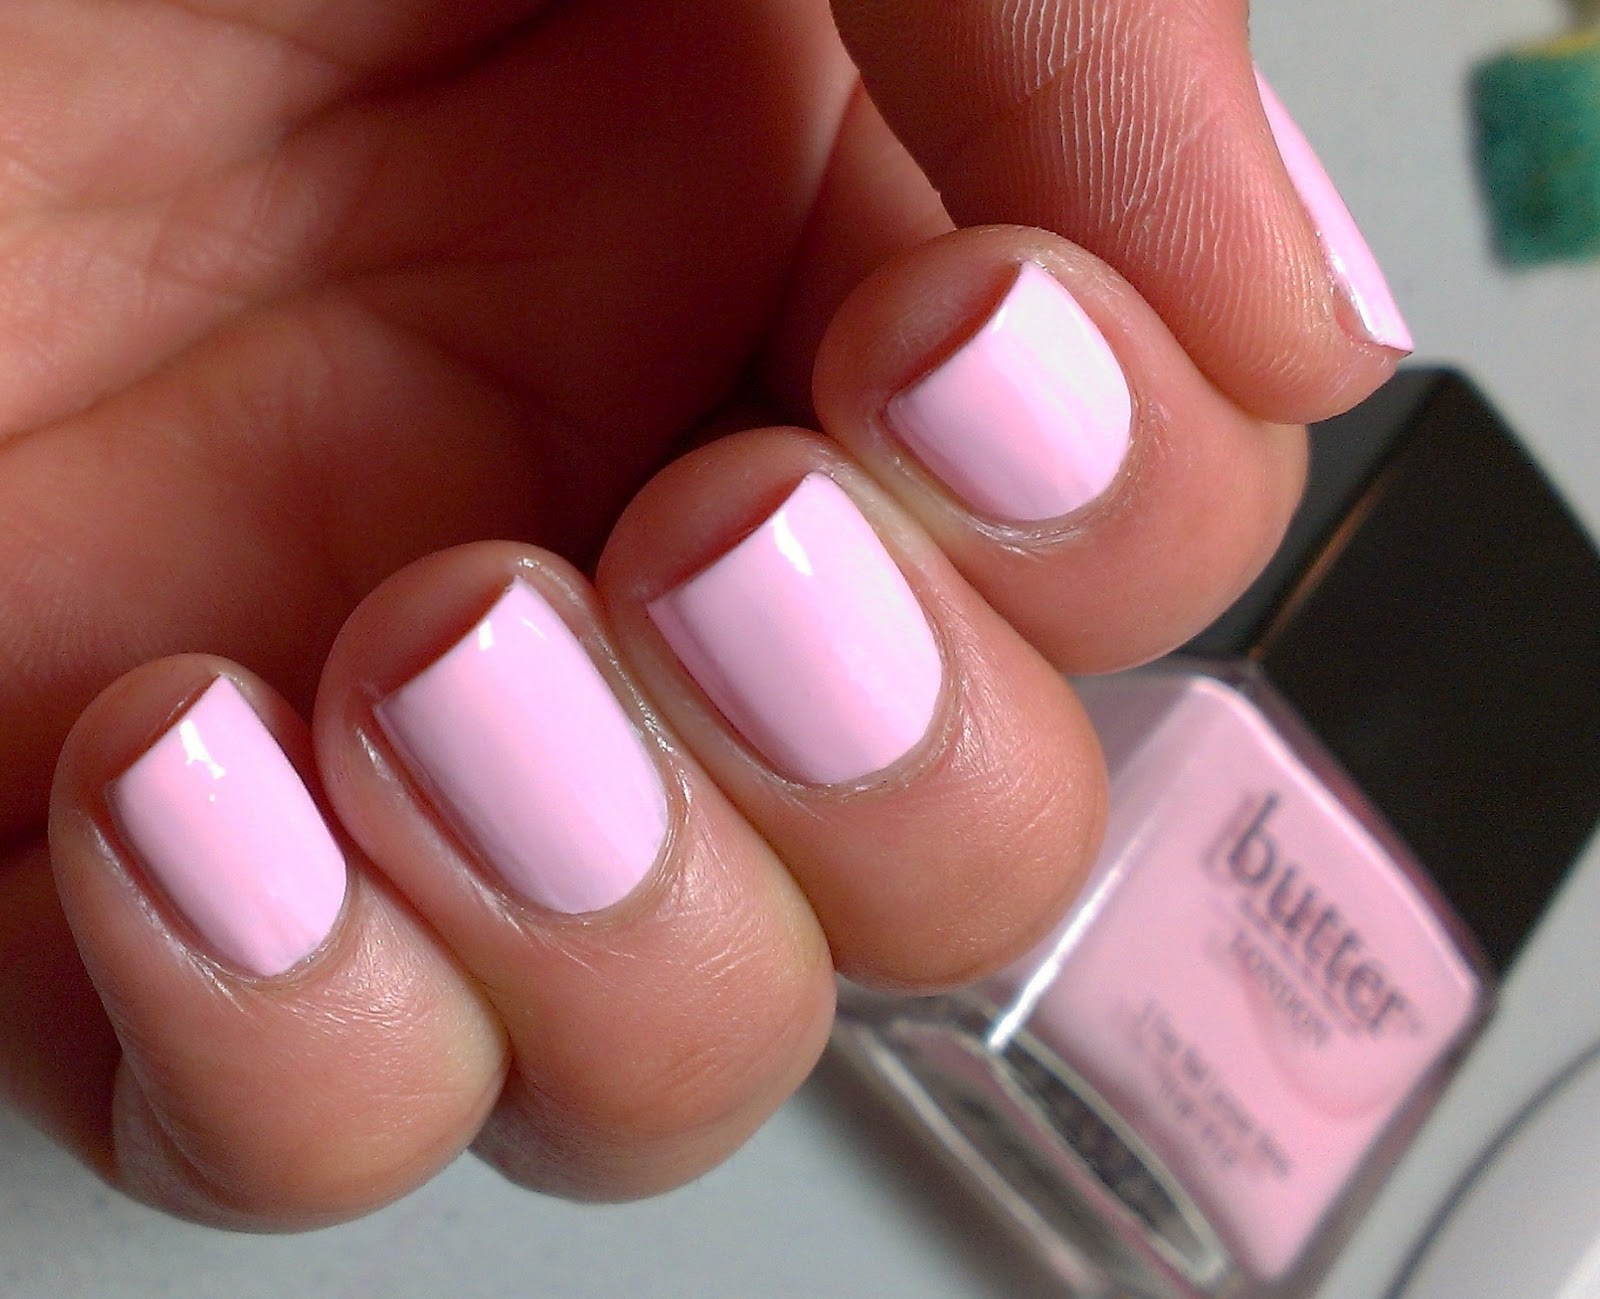 Butter London Nail Lacquer in "Teddy Girl" - wide 5